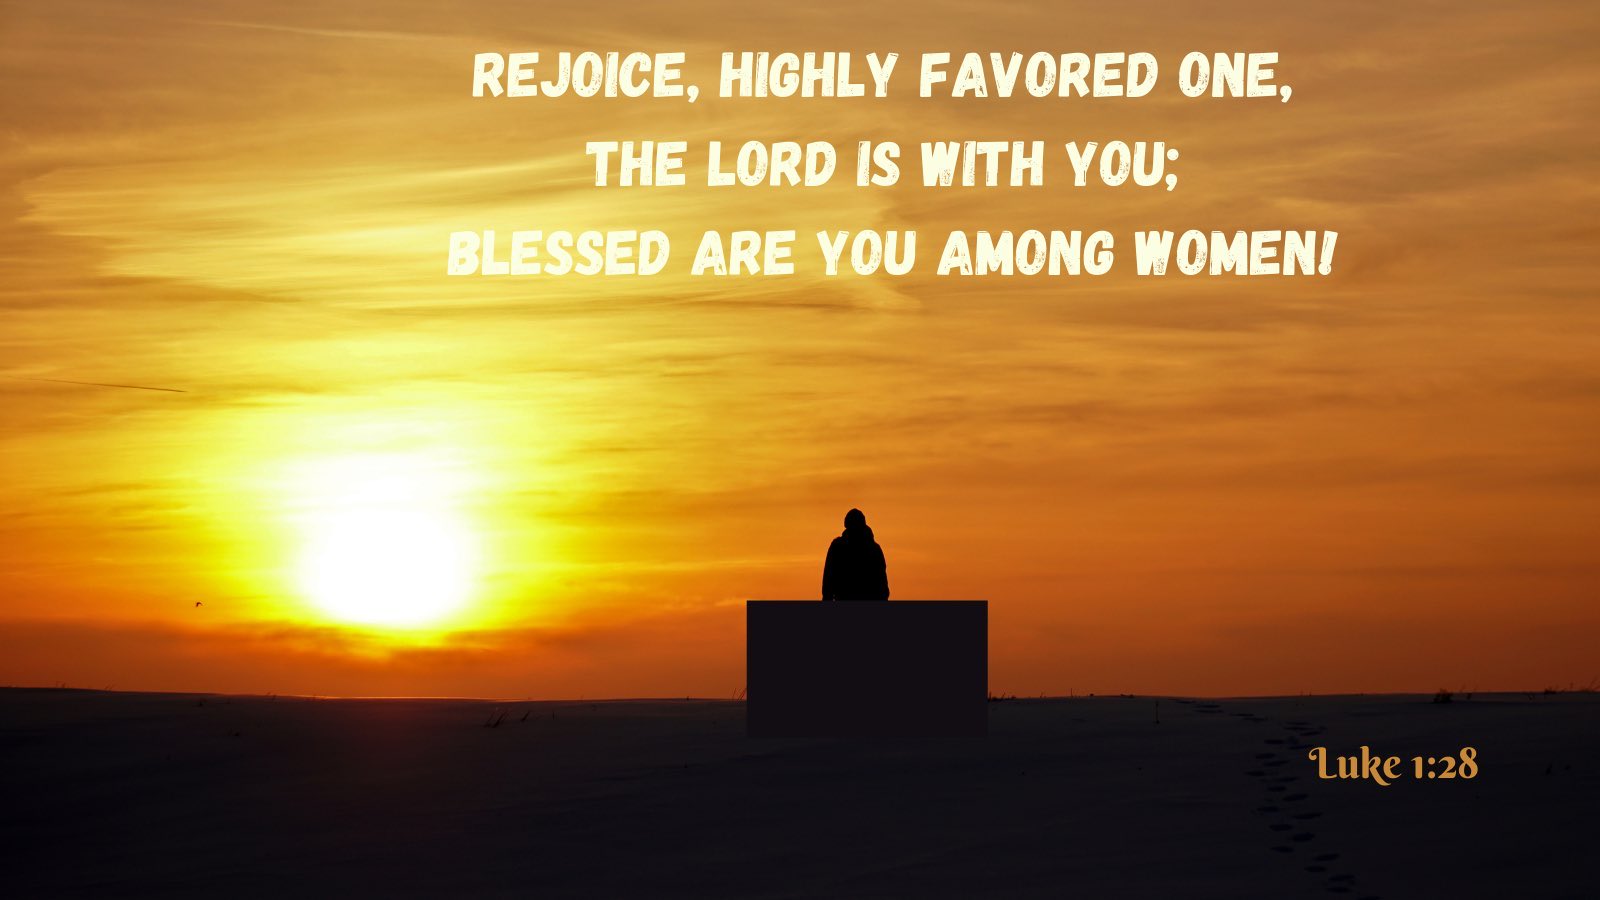 REJOICe, HIchLy FAVORED ONE, The LORD IS WITH YOU; BLBSSED ArE Vou AMOnC WOMENI Luke 1.28